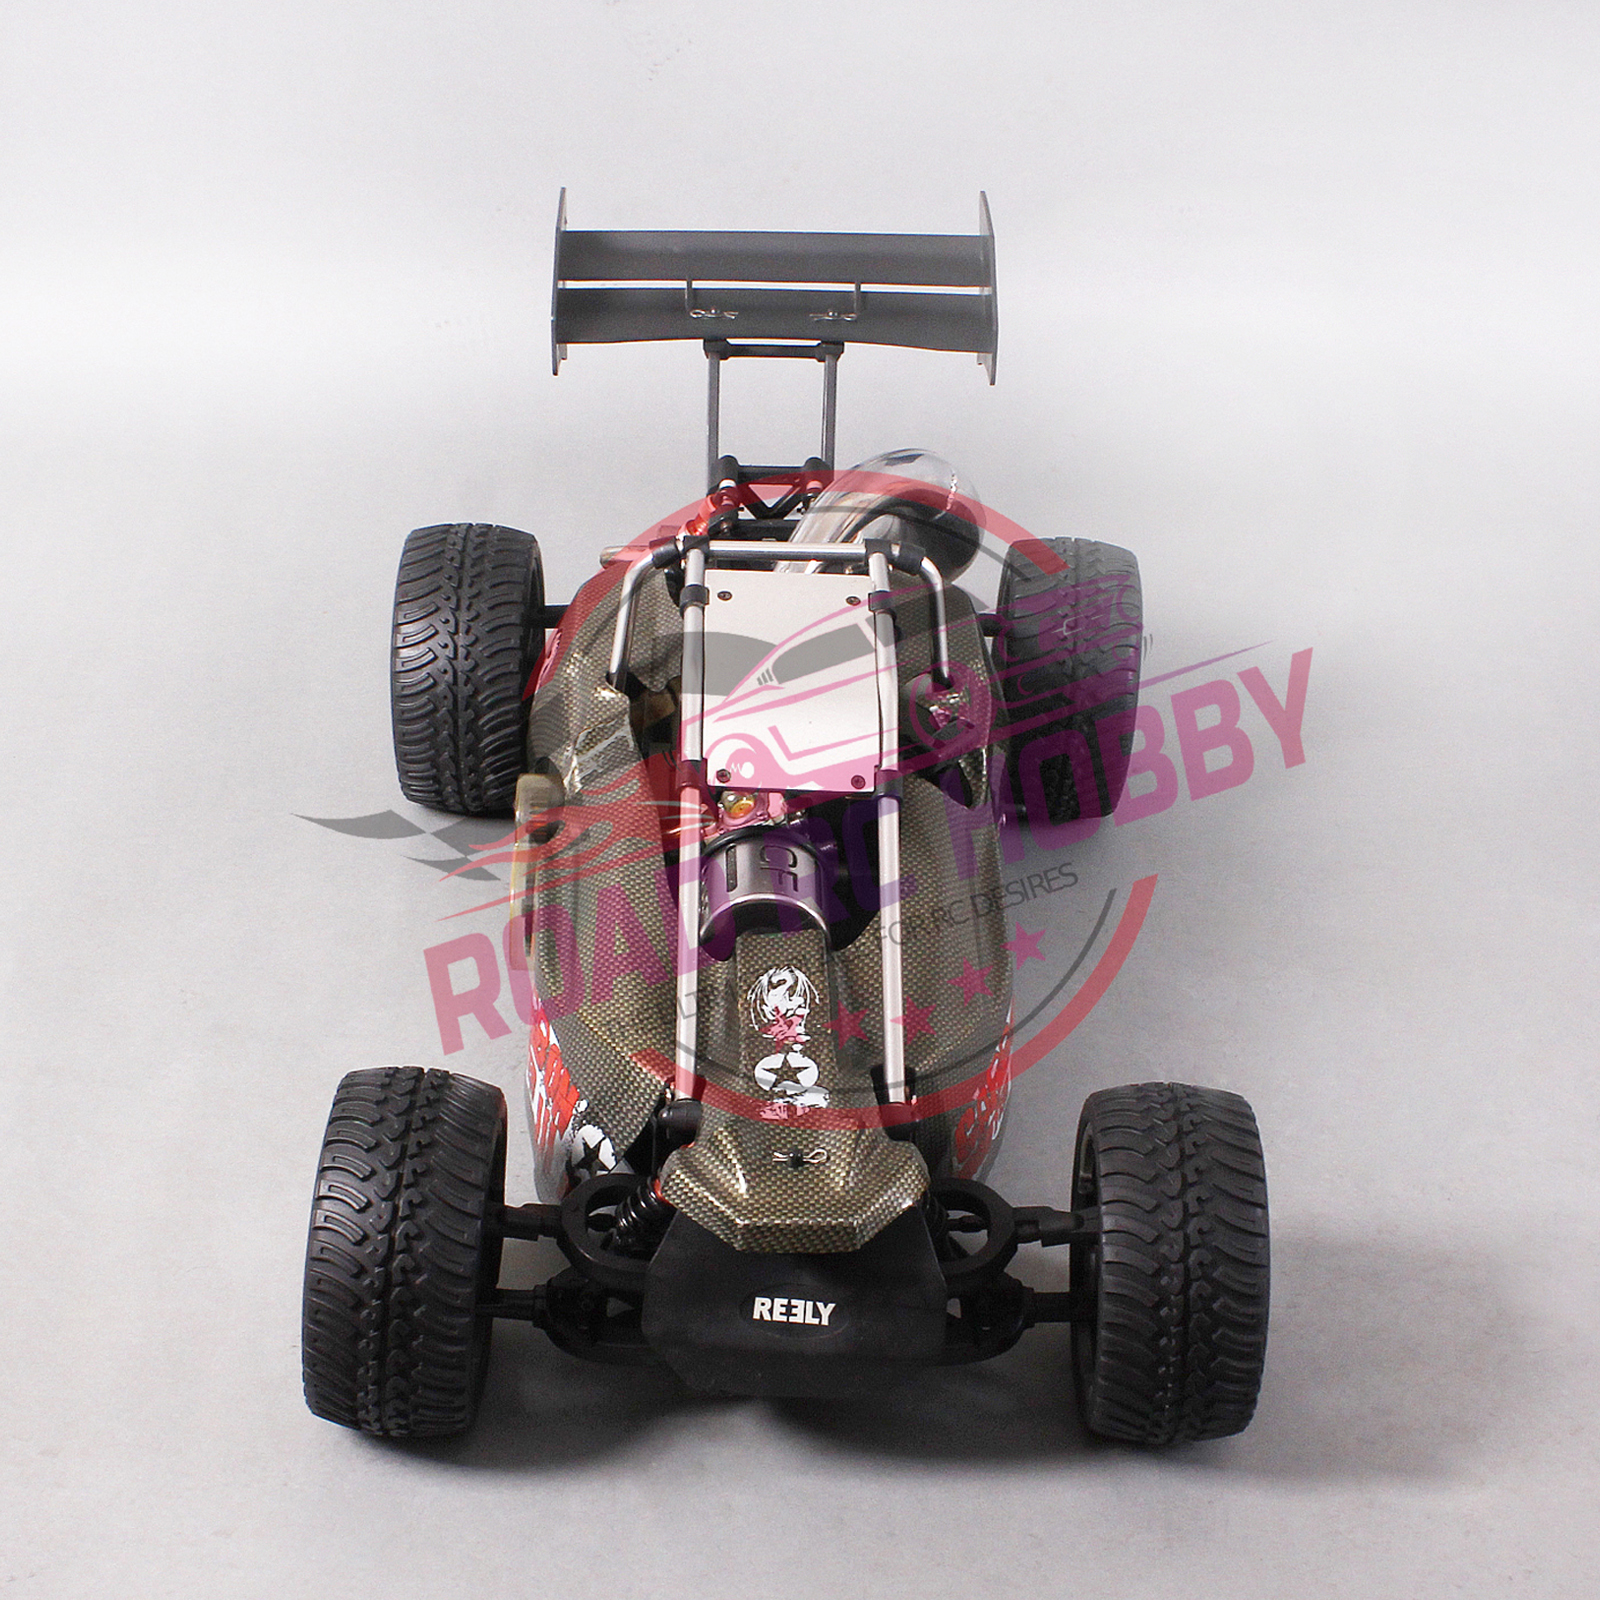 Reely Carbon Fighter III 1:6 RC Petrol Buggy RWD – Road RC Hobby